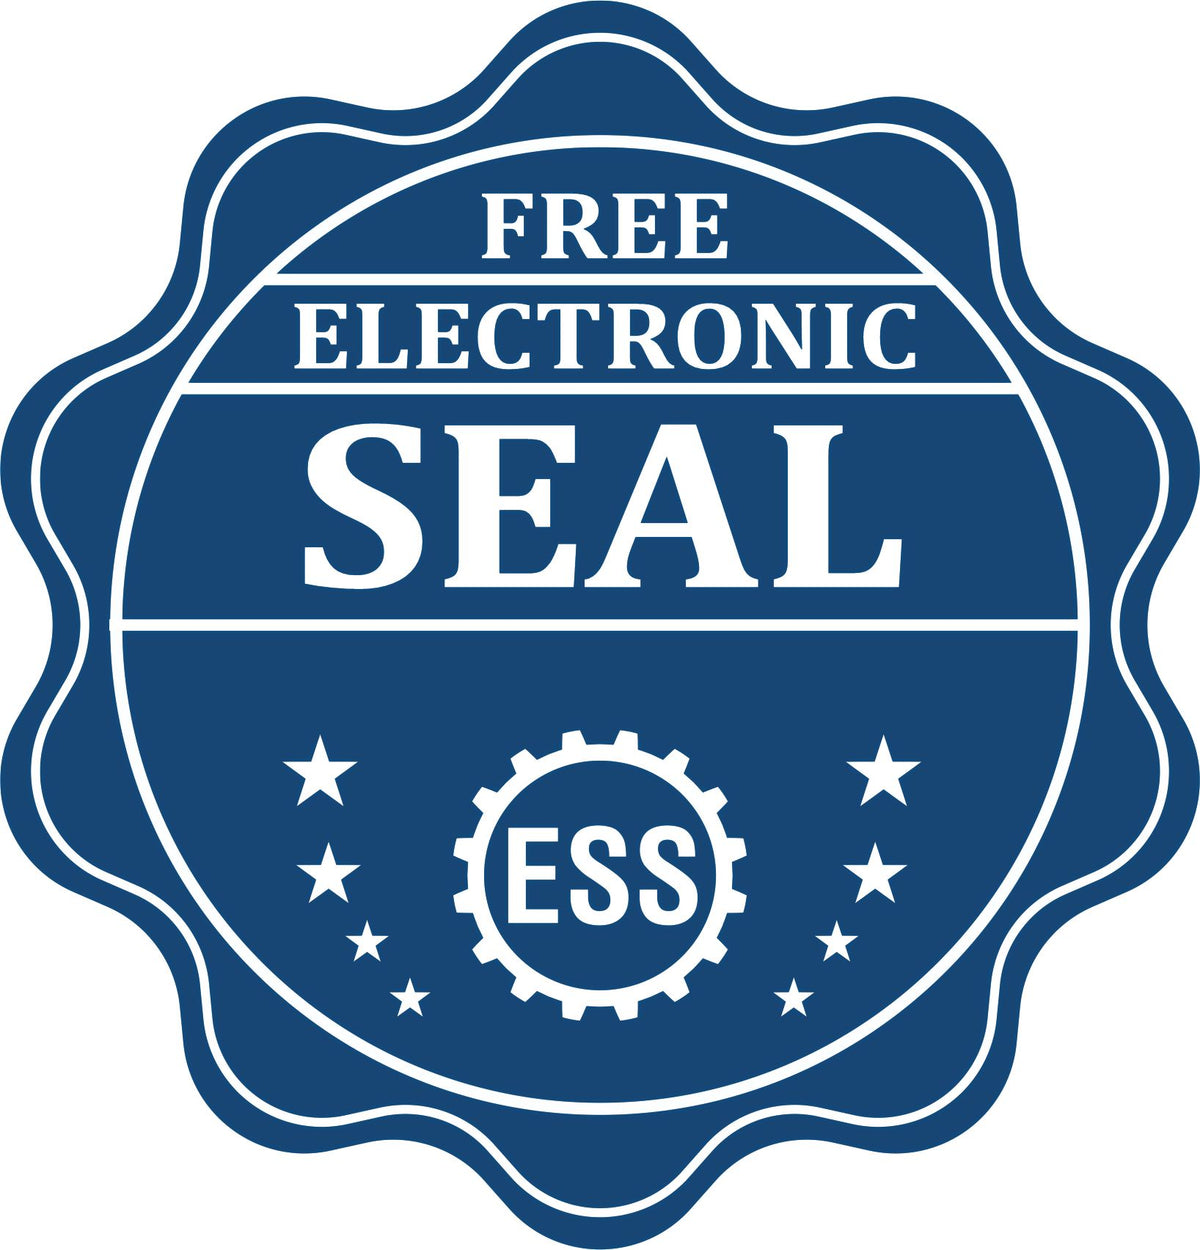 A badge showing a free electronic seal for the Slim Pre-Inked Ohio Professional Engineer Seal Stamp with stars and the ESS gear on the emblem.